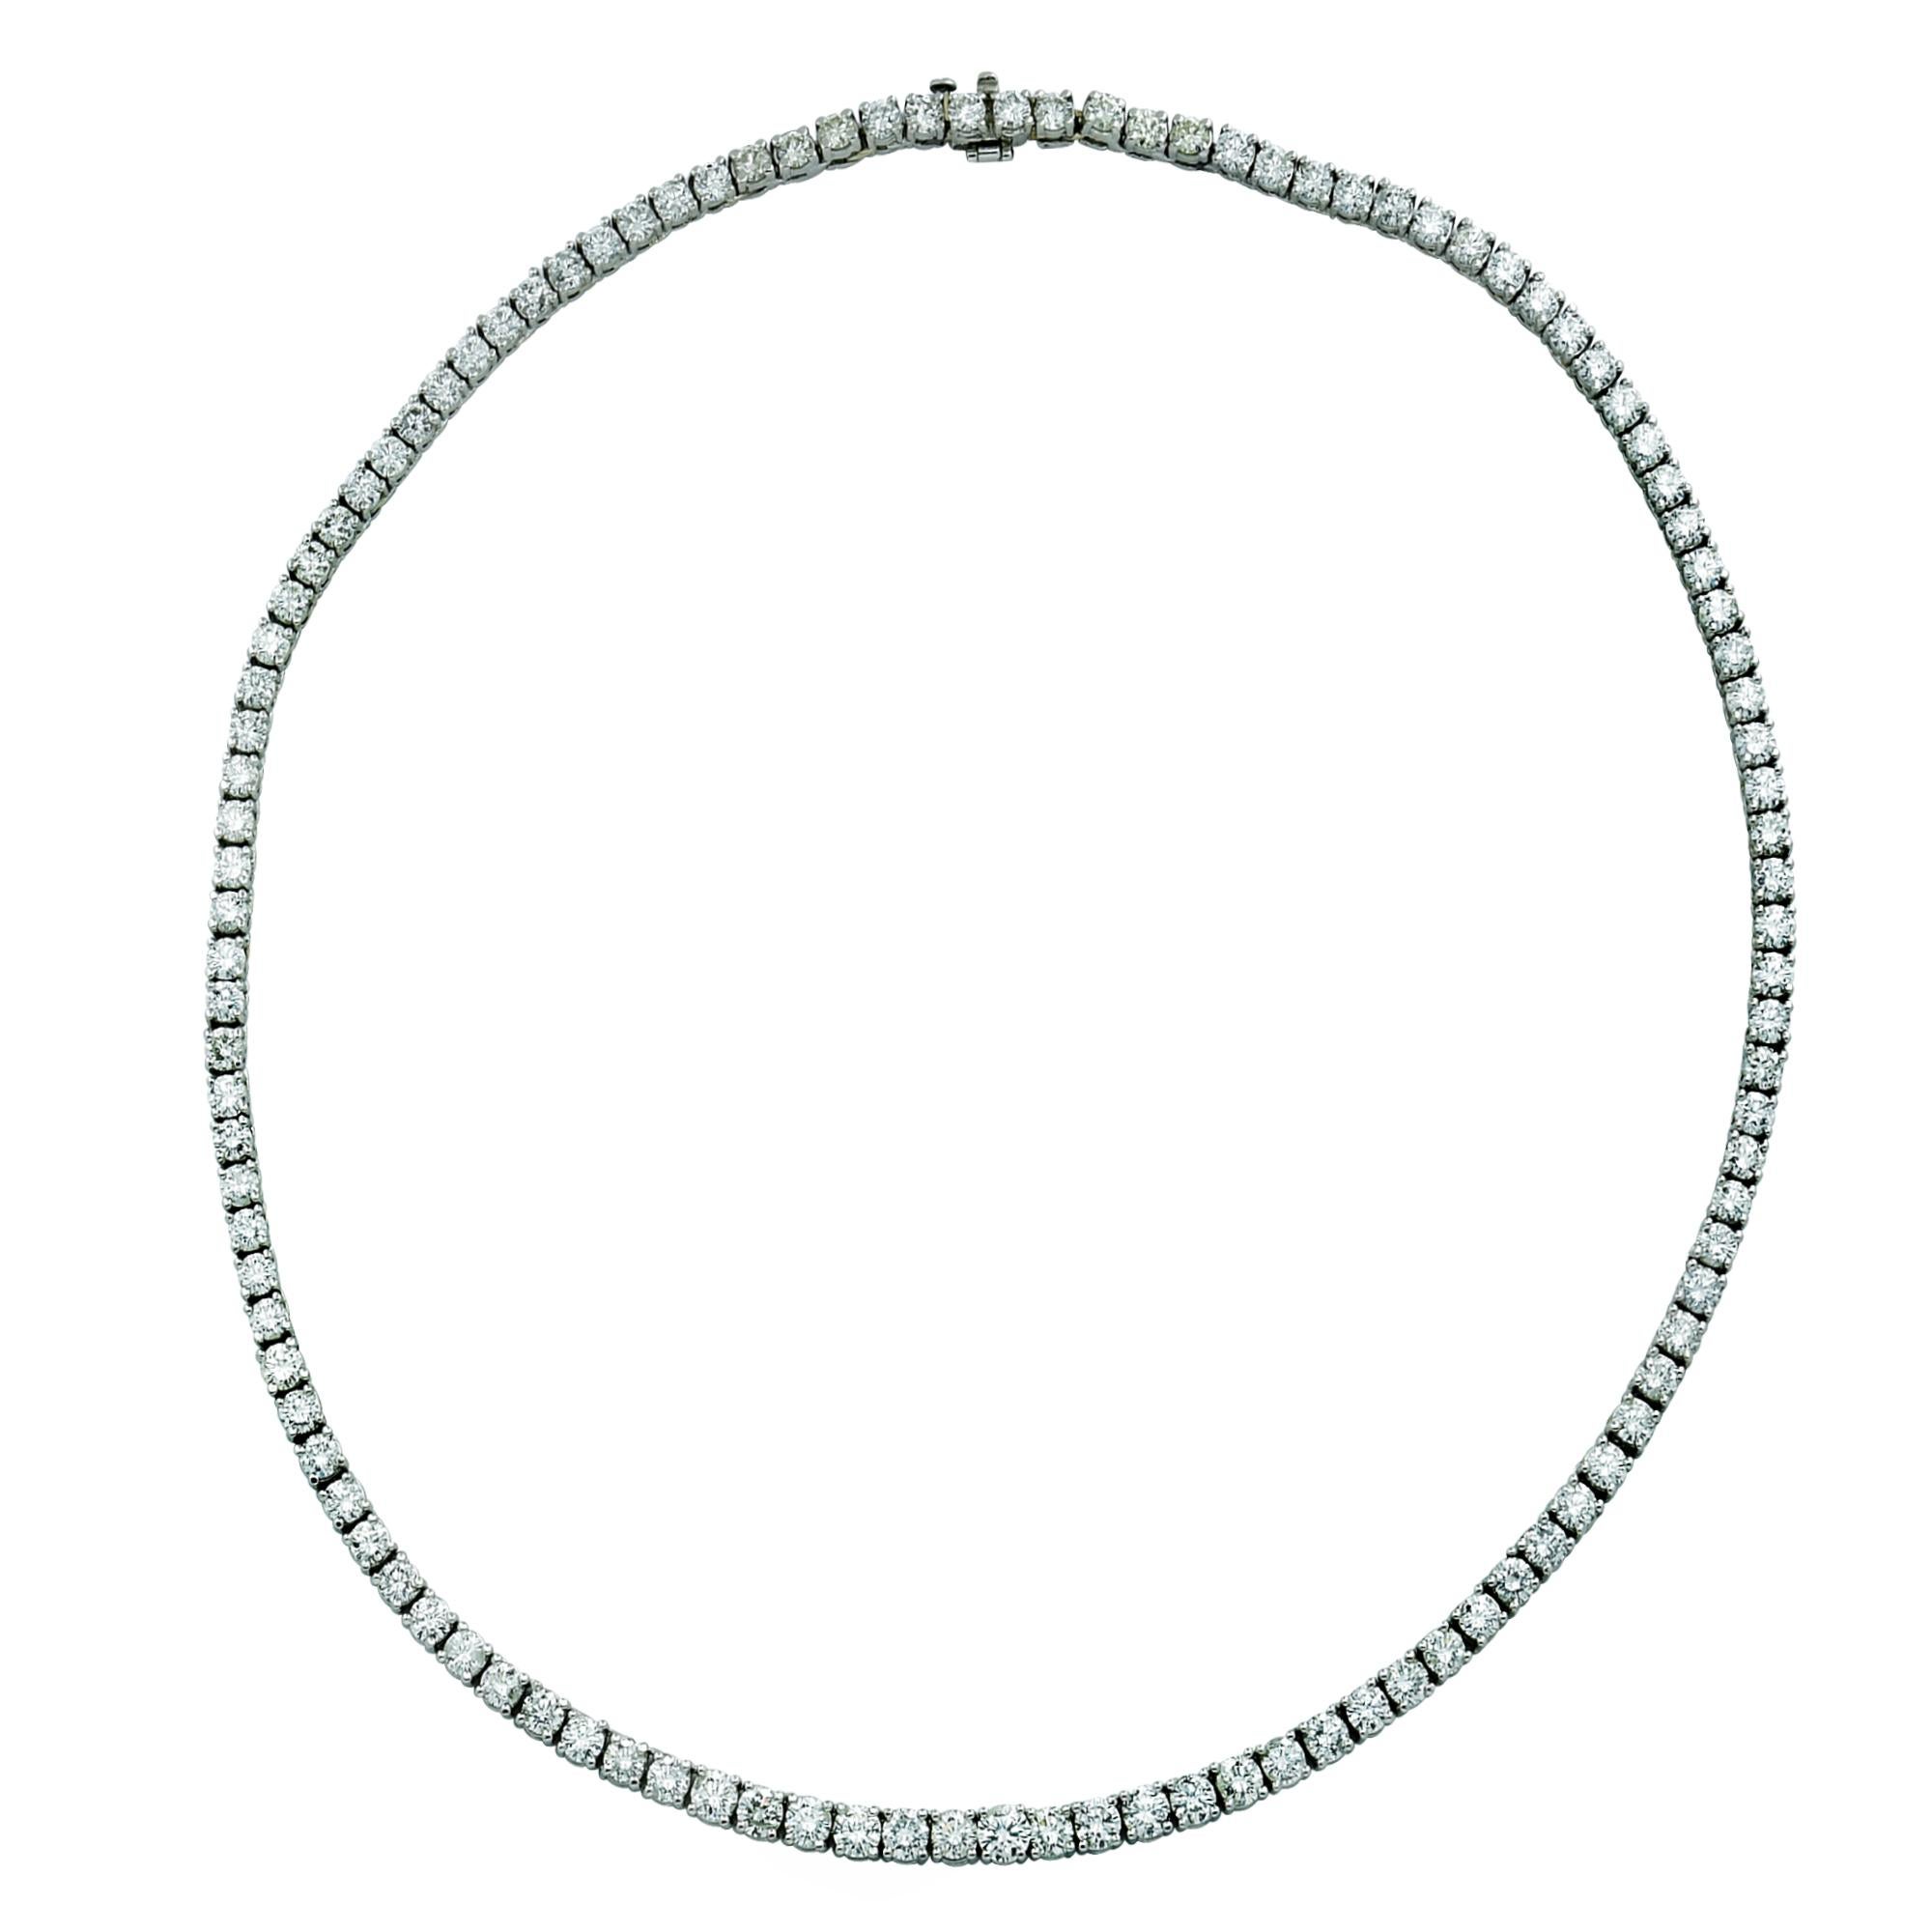 Exquisite Vivid Diamonds Straight Line diamond tennis necklace crafted in 18 karat White Gold, showcasing 150 round brilliant cut diamonds weighing 9.37 carats, F color, VS Clarity. Each diamond was carefully selected, perfectly matched and set in a